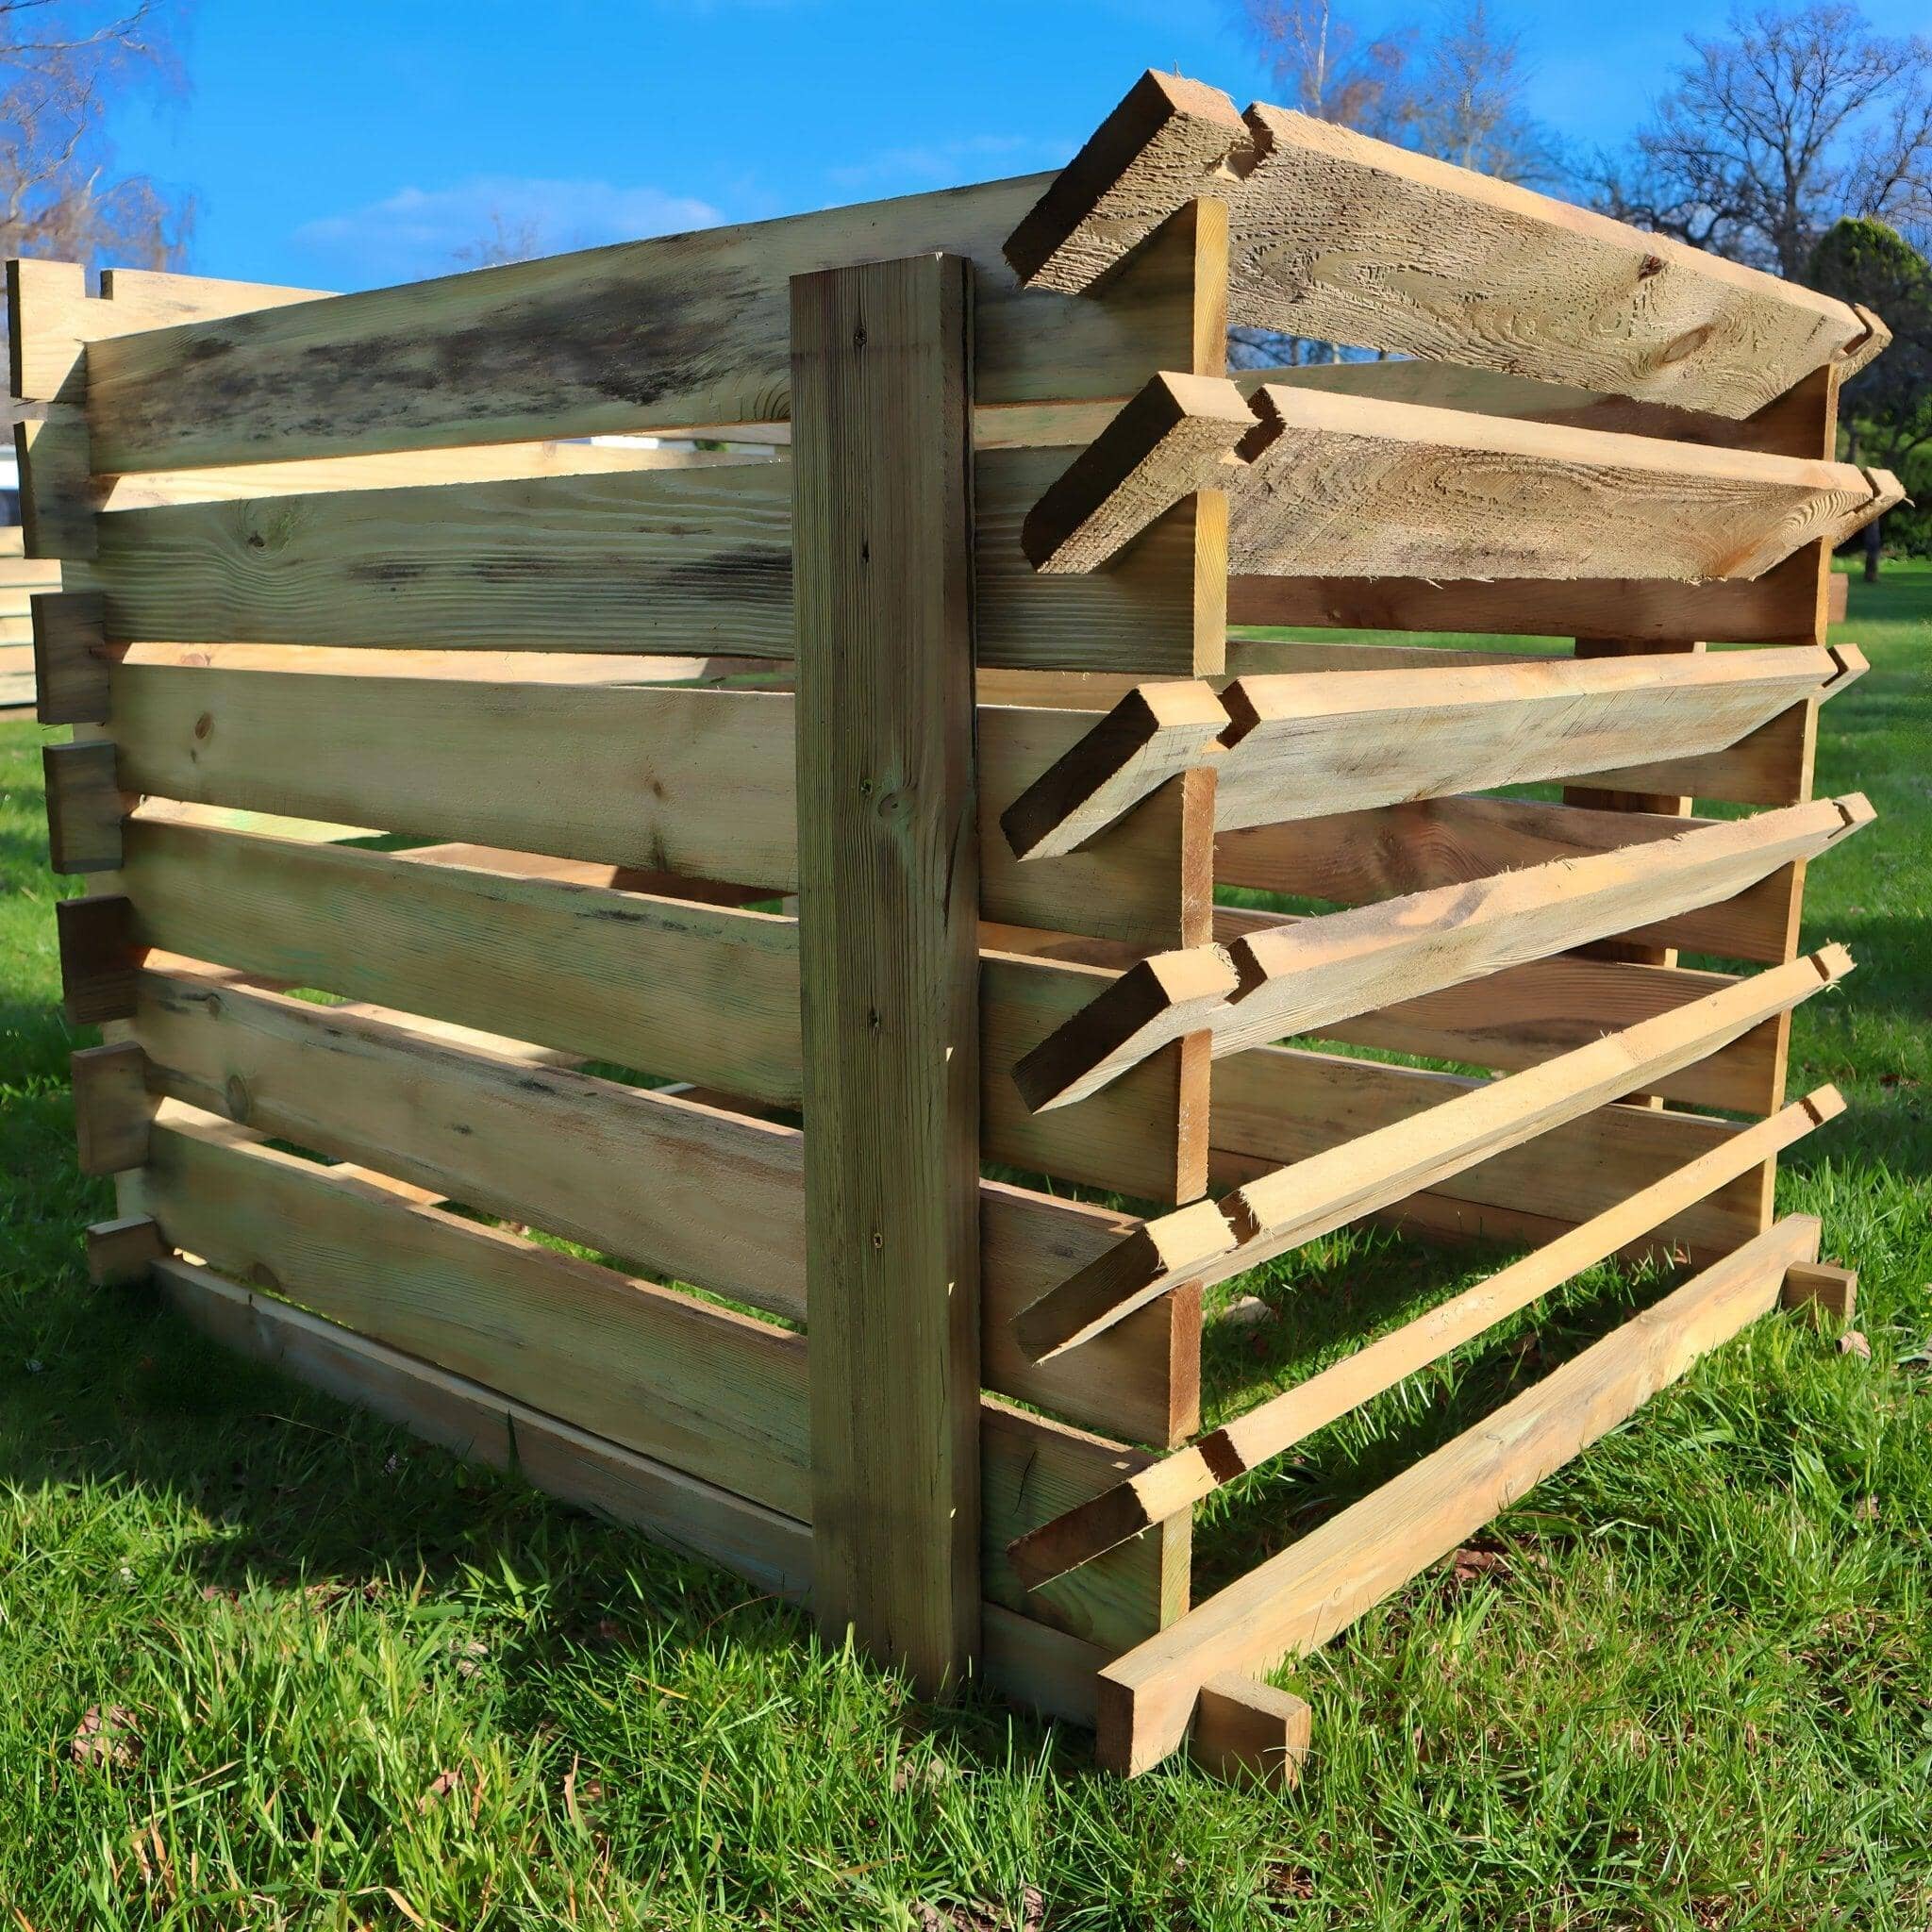 High-quality woven wood compost bins for premium composting